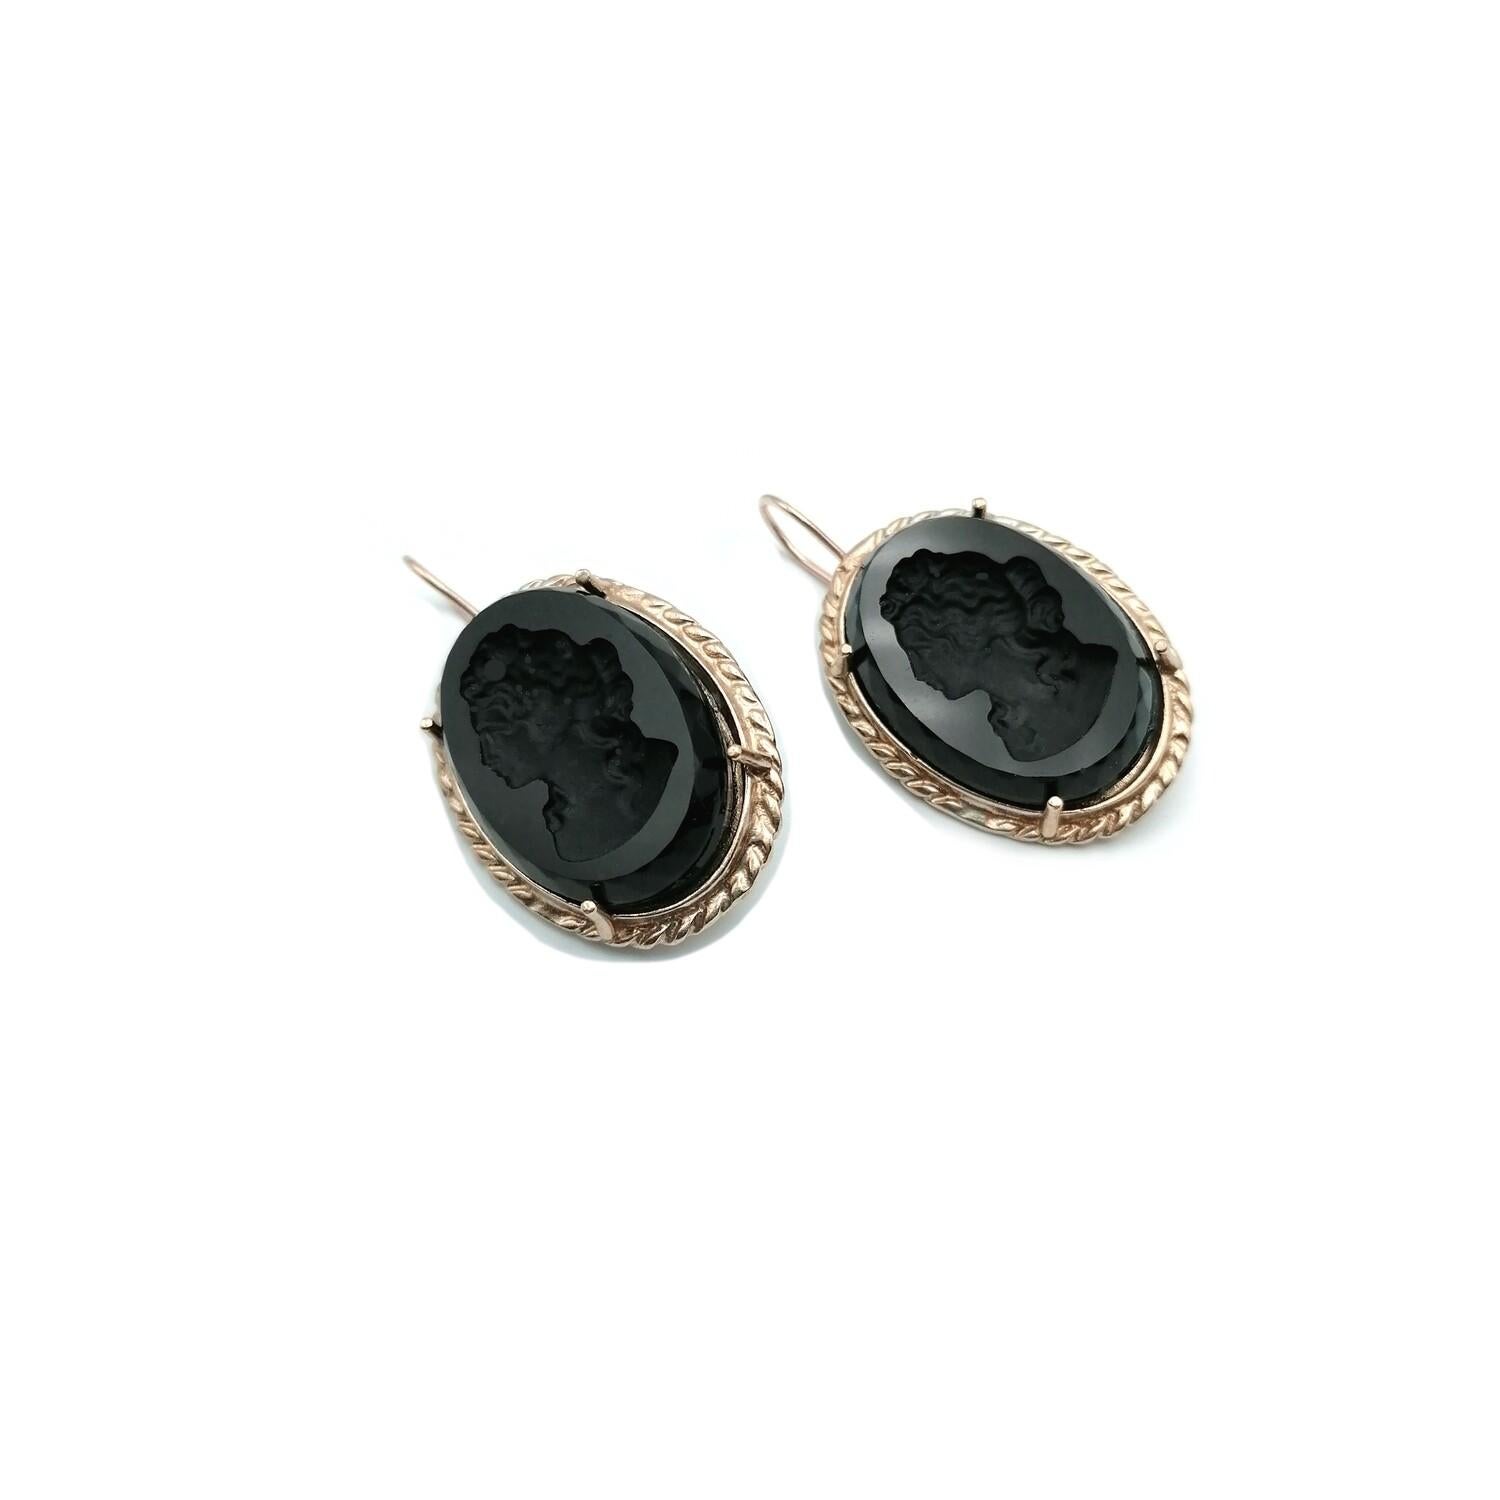 Bronze earrings, with Murano glasses carved and cut by hand representing ancient Roman woman's head. For the ear is used a bronze wire properly modeled. To fix the stones to our jewels, according to the Italian goldsmith's tradition, we use the